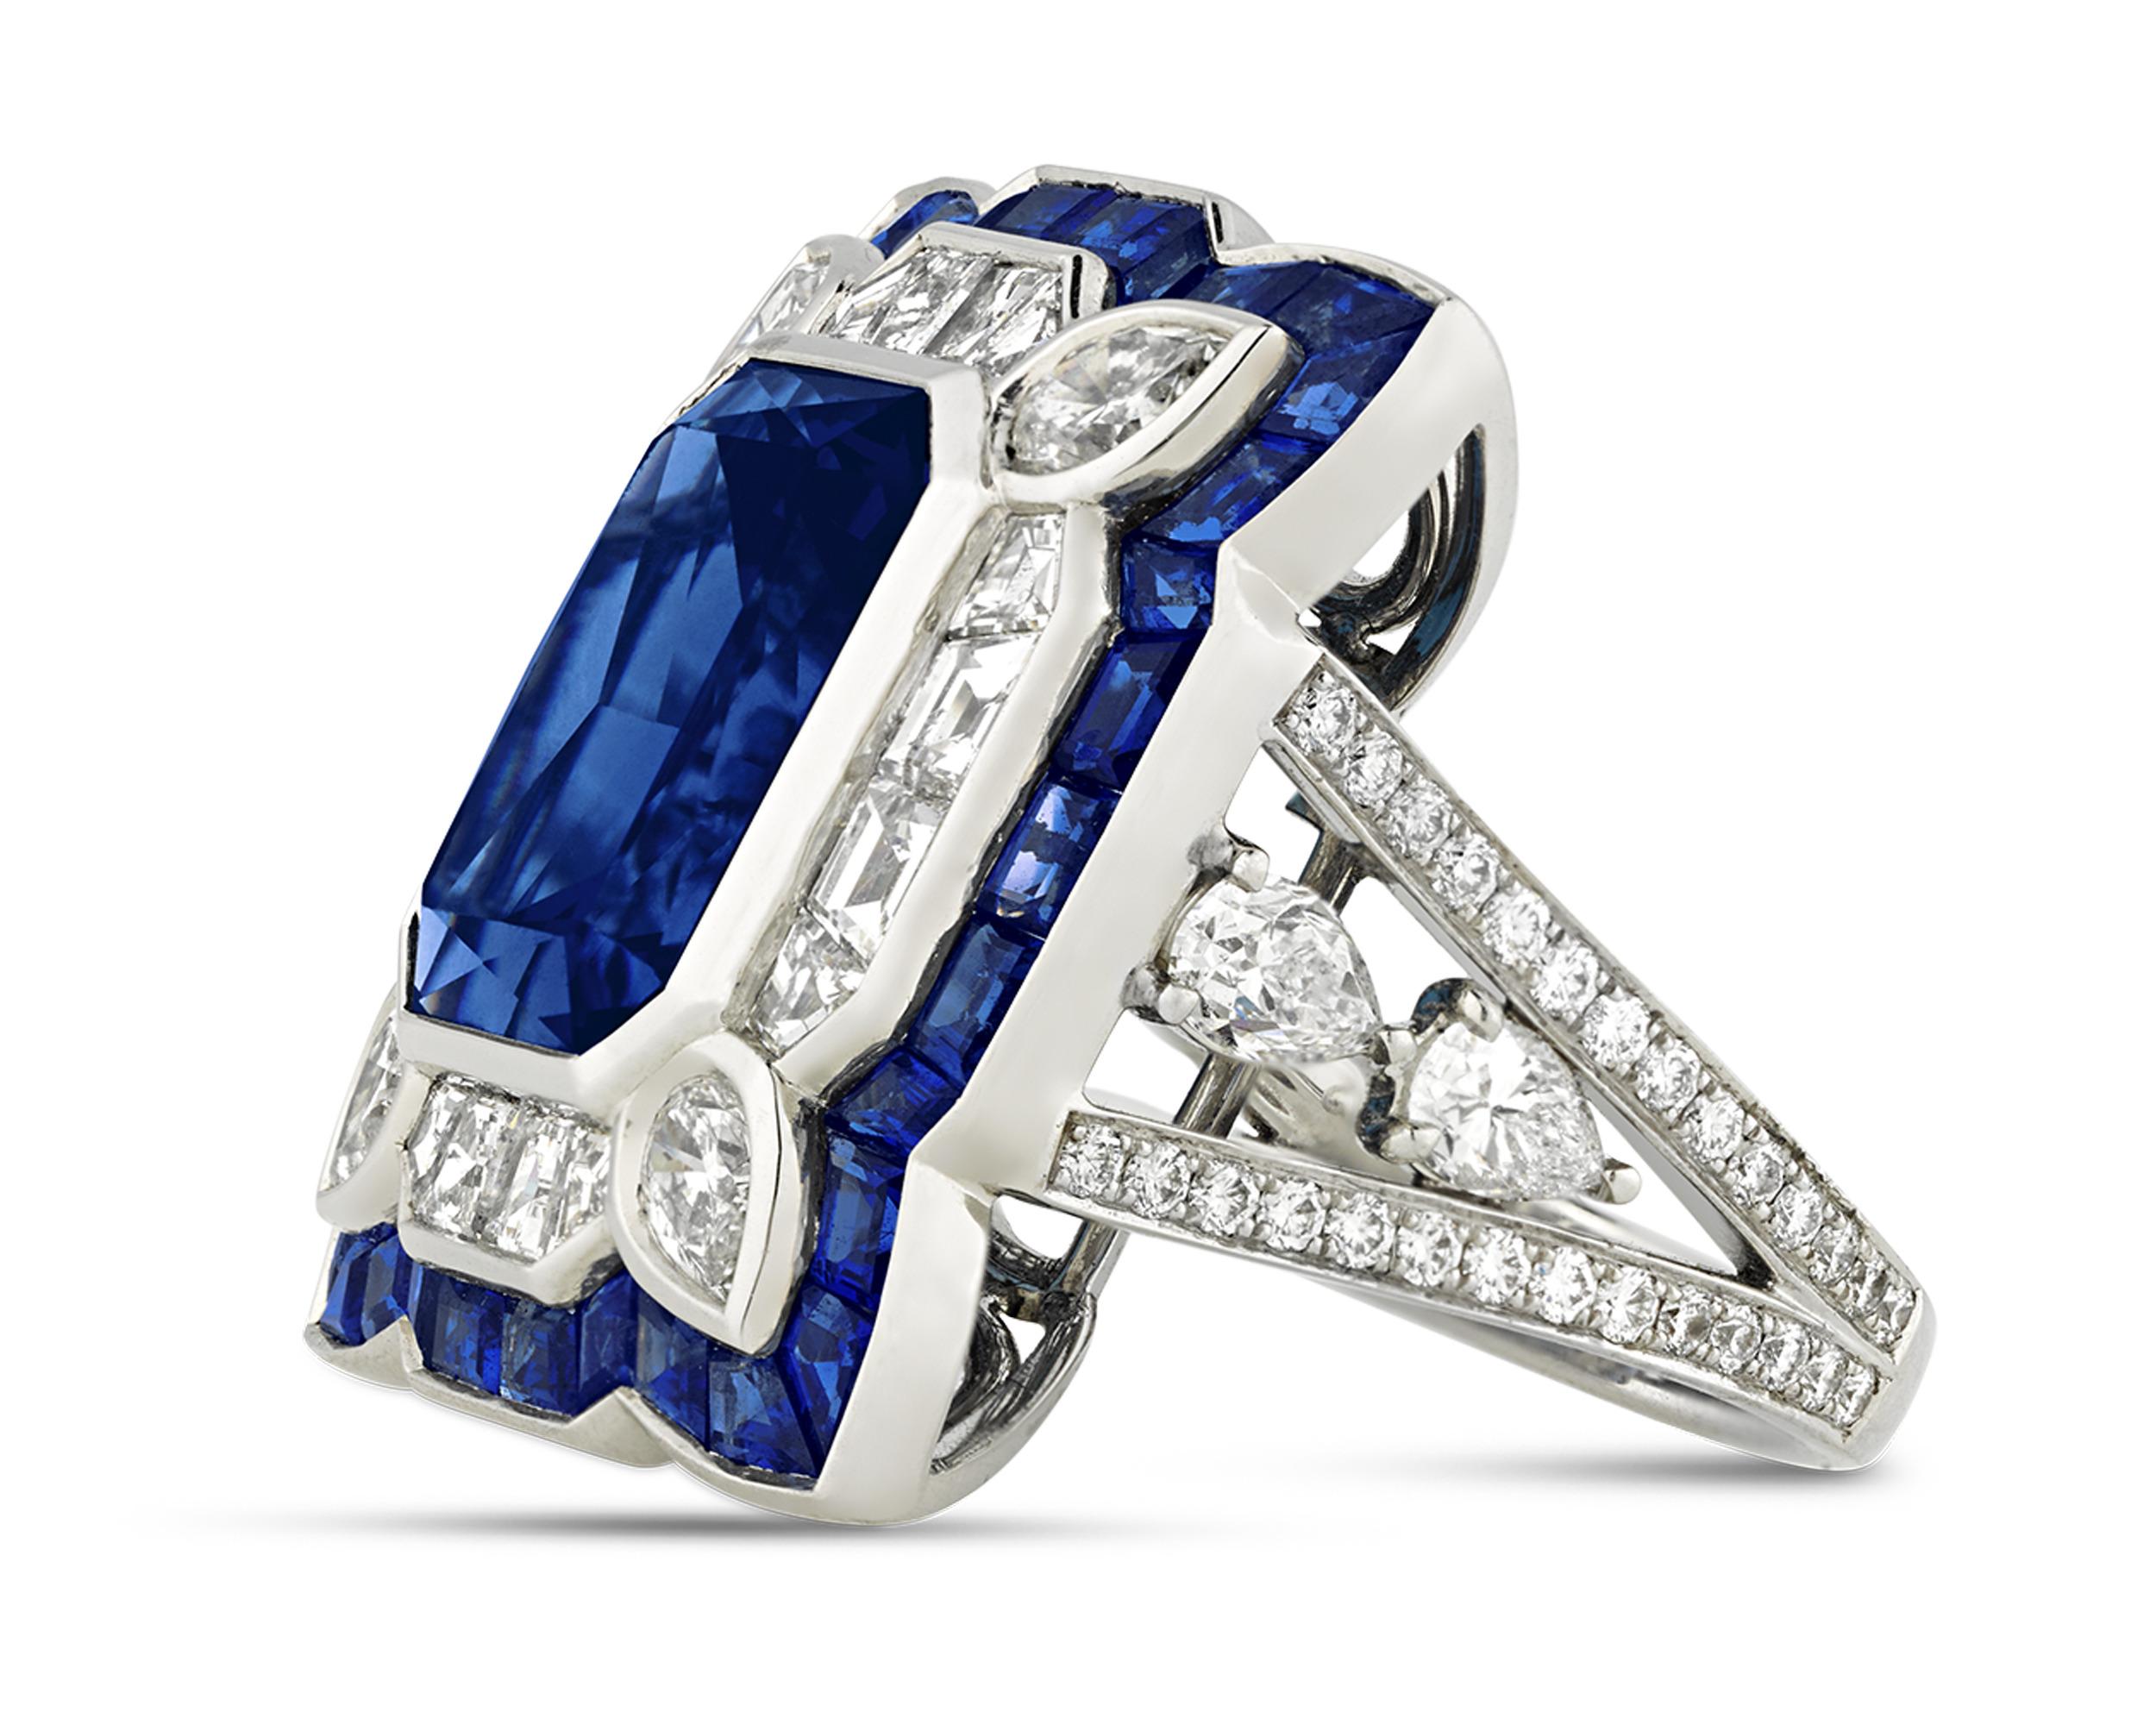 Exuding the classic elegance of the Art Deco style, this unique ring features a sizable tanzanite gemstone totaling 10.79 carats. While many display a light, violet hue, those that possess a deep and highly saturated coloration such as this are